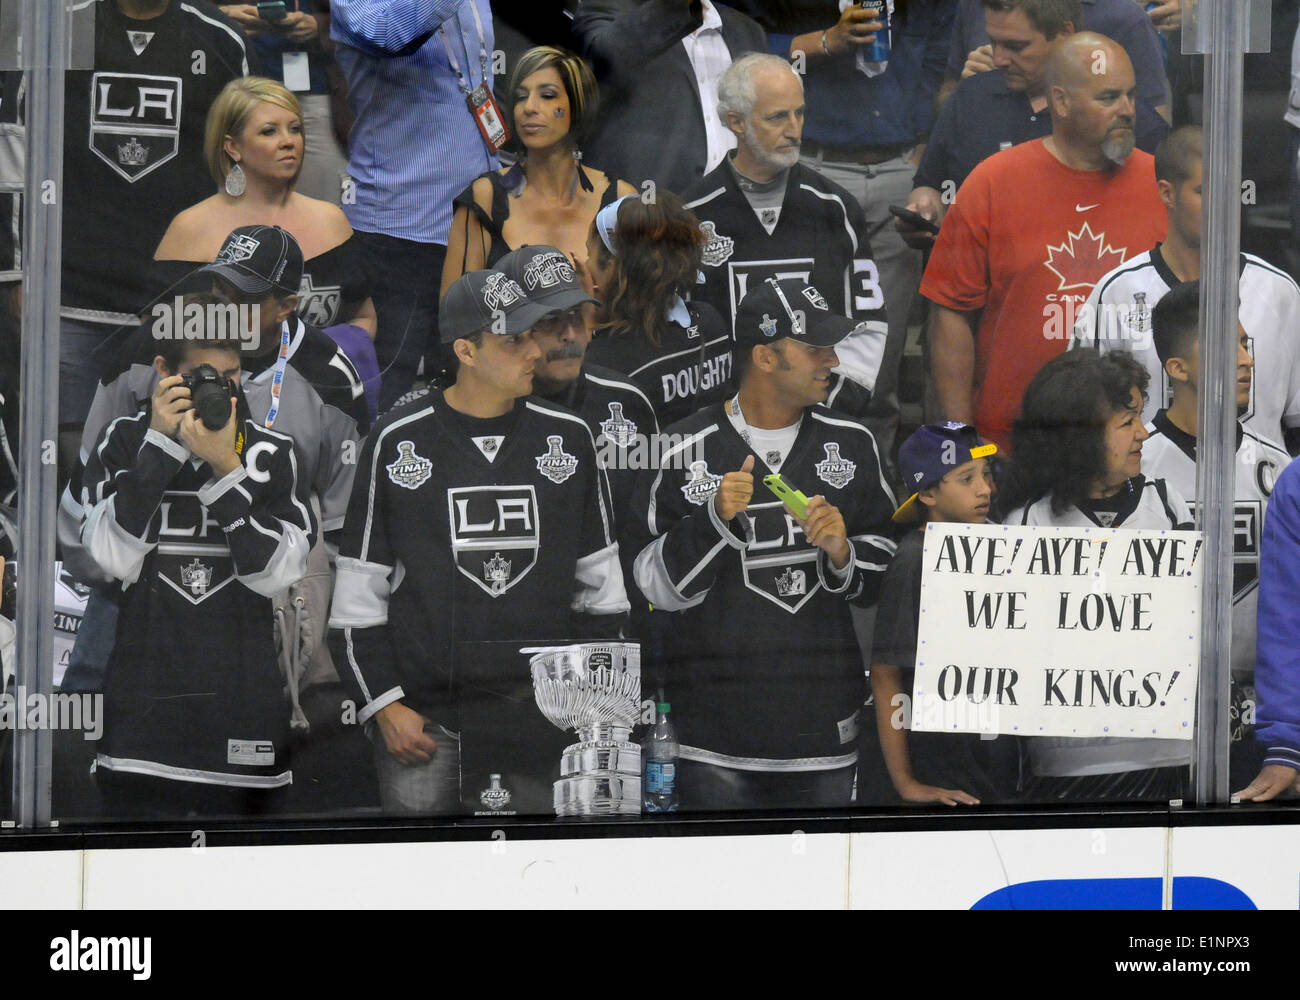 Staples Center, Los Angeles, California, USA. 07th June, 2014. Kings fans during pre-skate prior to game 2 of the Stanley Cup Final between the New York Rangers and the Los Angeles Kings at Staples Center in Los Angeles, CA. Stock Photo